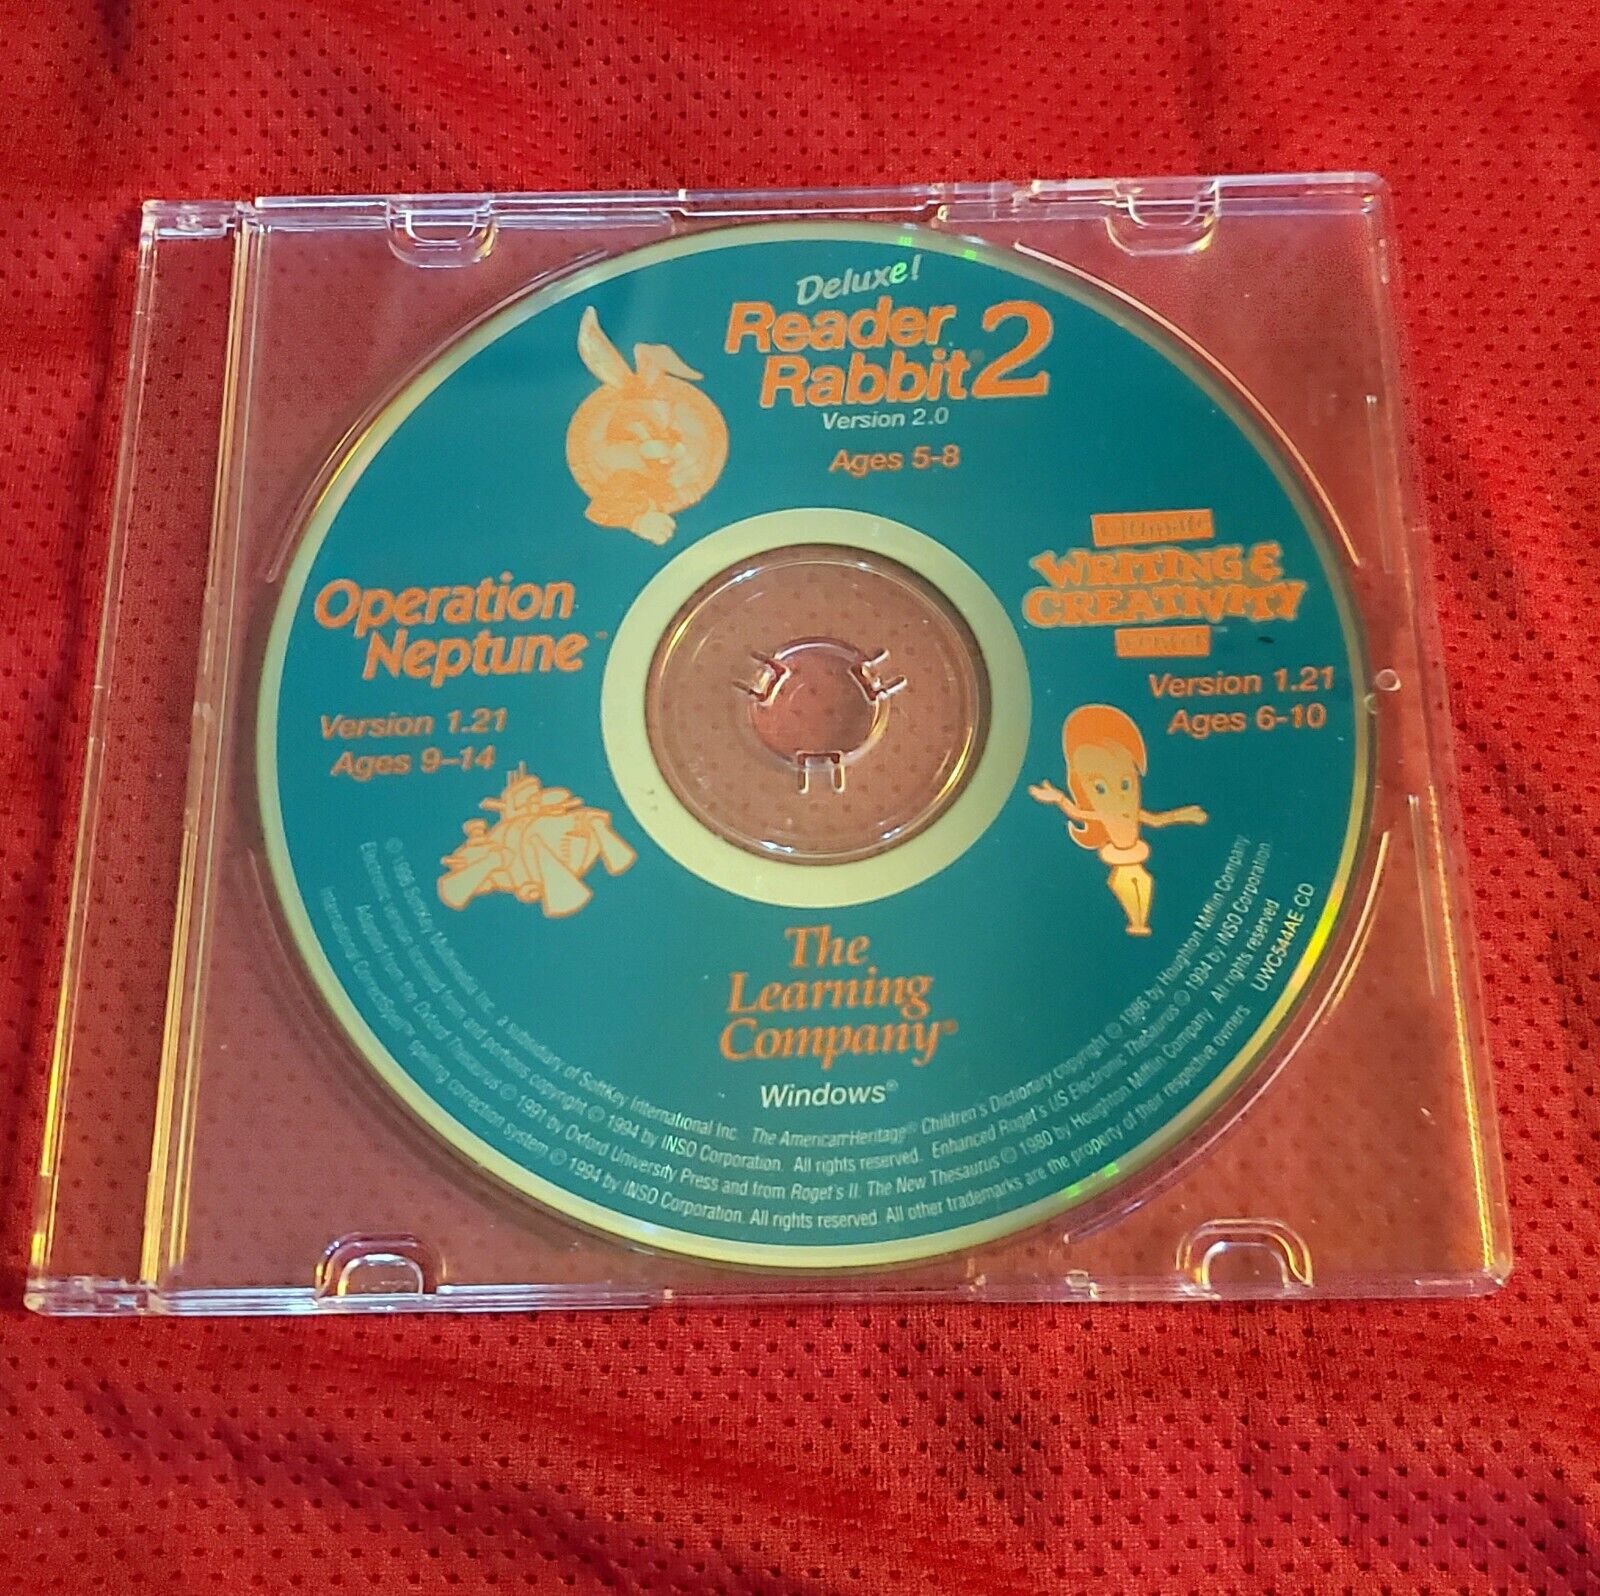 VINTAGE Deluxe Reader Rabbit 2 CD Disc Ver 2.0 The Learning Company 1996